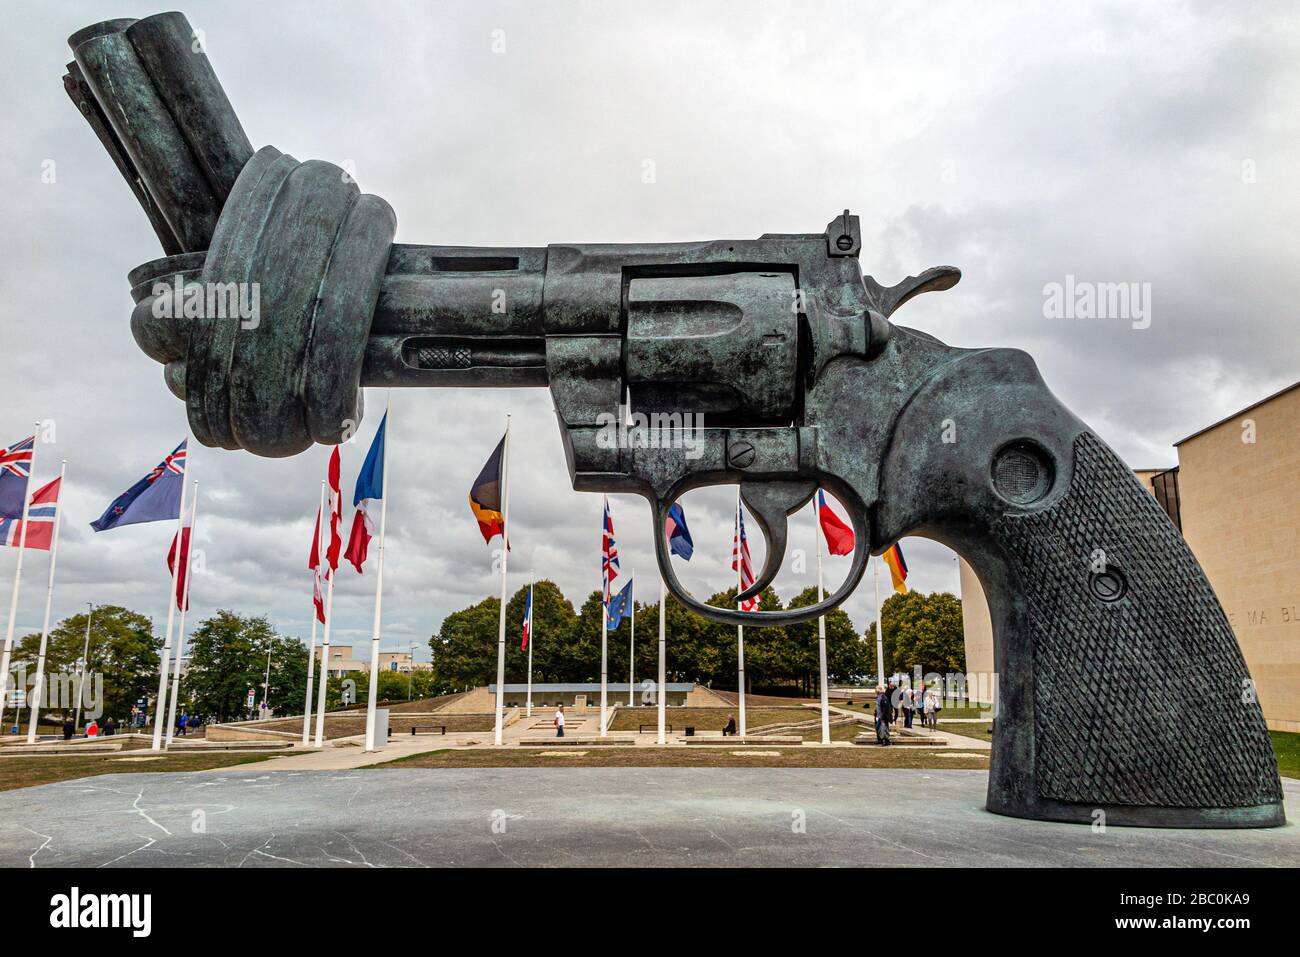 'NON VIOLENCE', REVOLVER WITH A KNOTTED BARREL, REPLICA OF THE SCULPTURE MADE BY THE SWEDISH ARTIST CARL FREDRIK REUTERSWARD FOLLOWING THE MURDER OF HIS FRIEND JOHN LENNON, CAEN MEMORIAL, CALVADOS (14), FRANCE Stock Photo